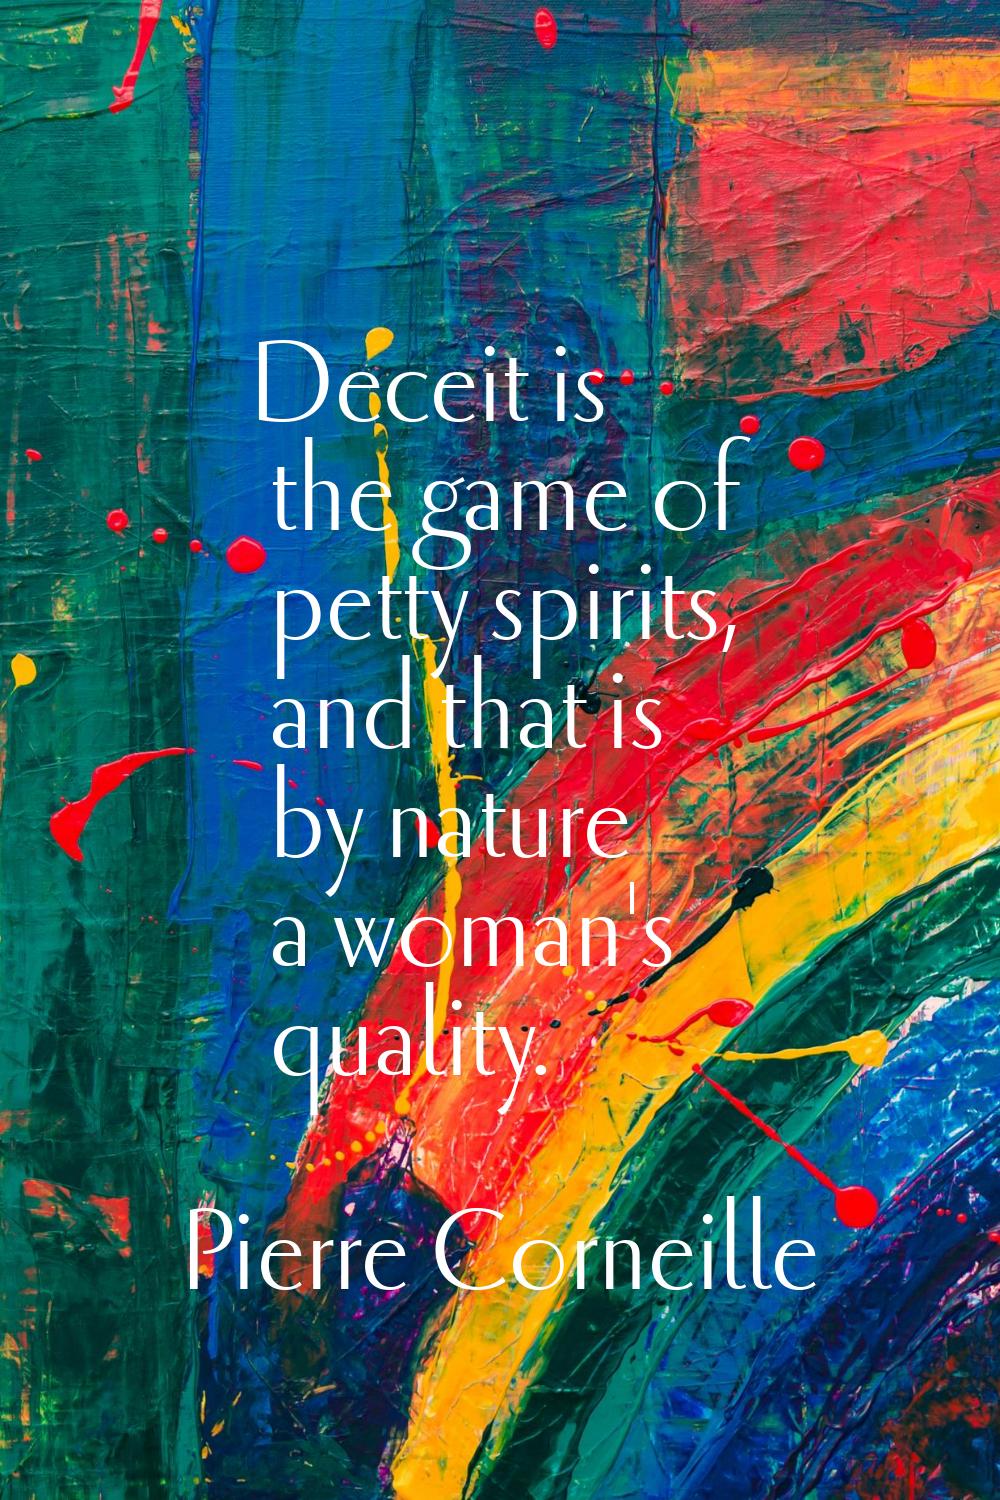 Deceit is the game of petty spirits, and that is by nature a woman's quality.